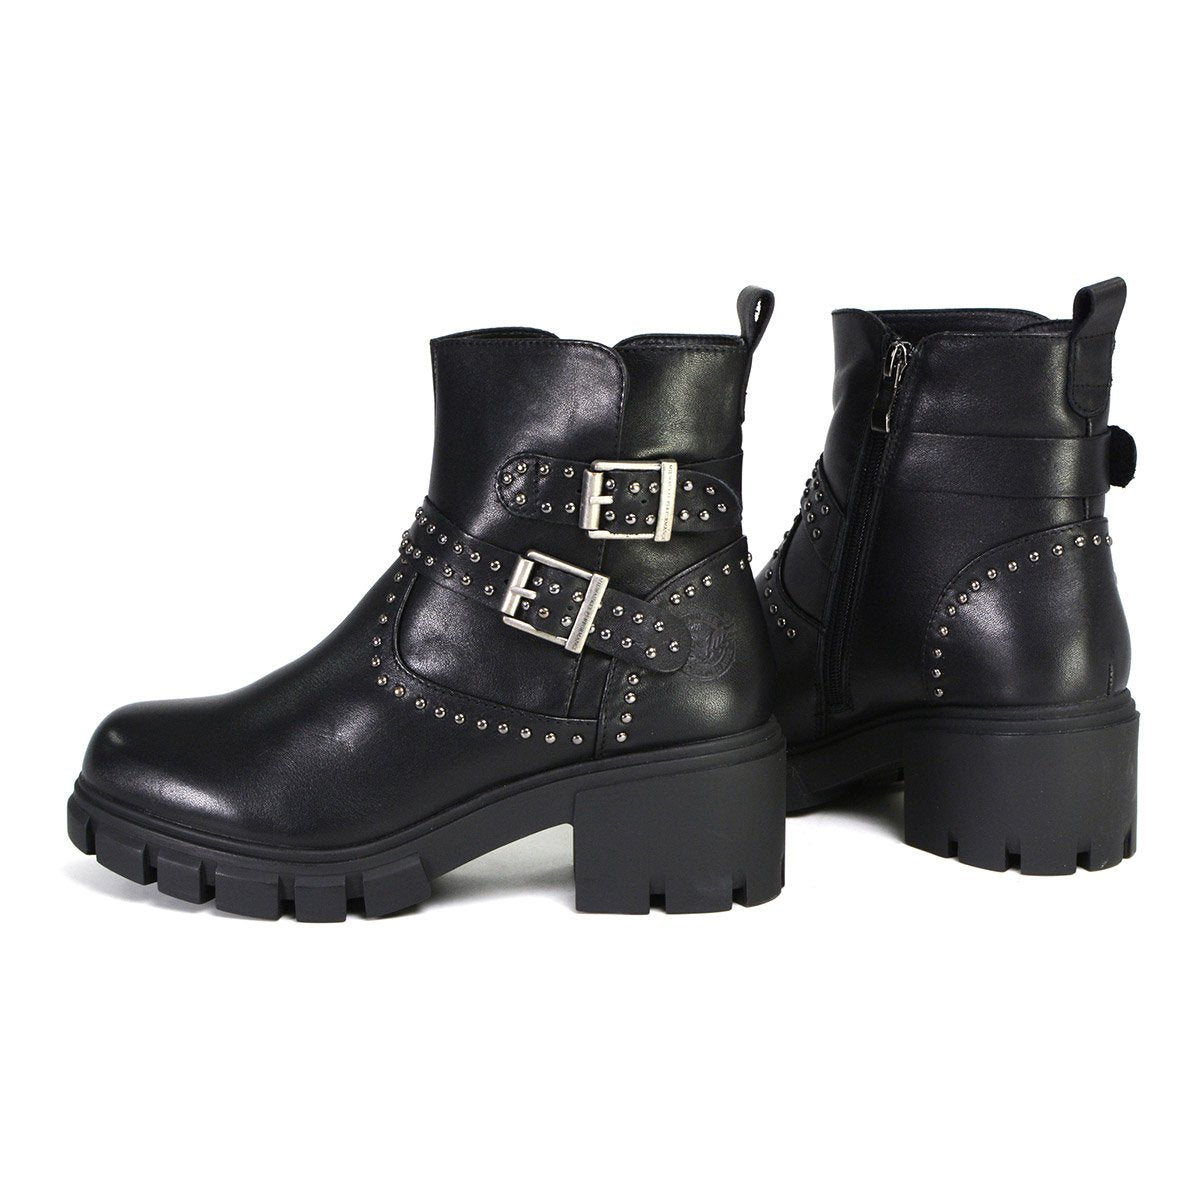 Milwaukee Performance Leather MBL9446 Women's ‘Siren’ Black Leather Studded Boots with Side Zipper Entry